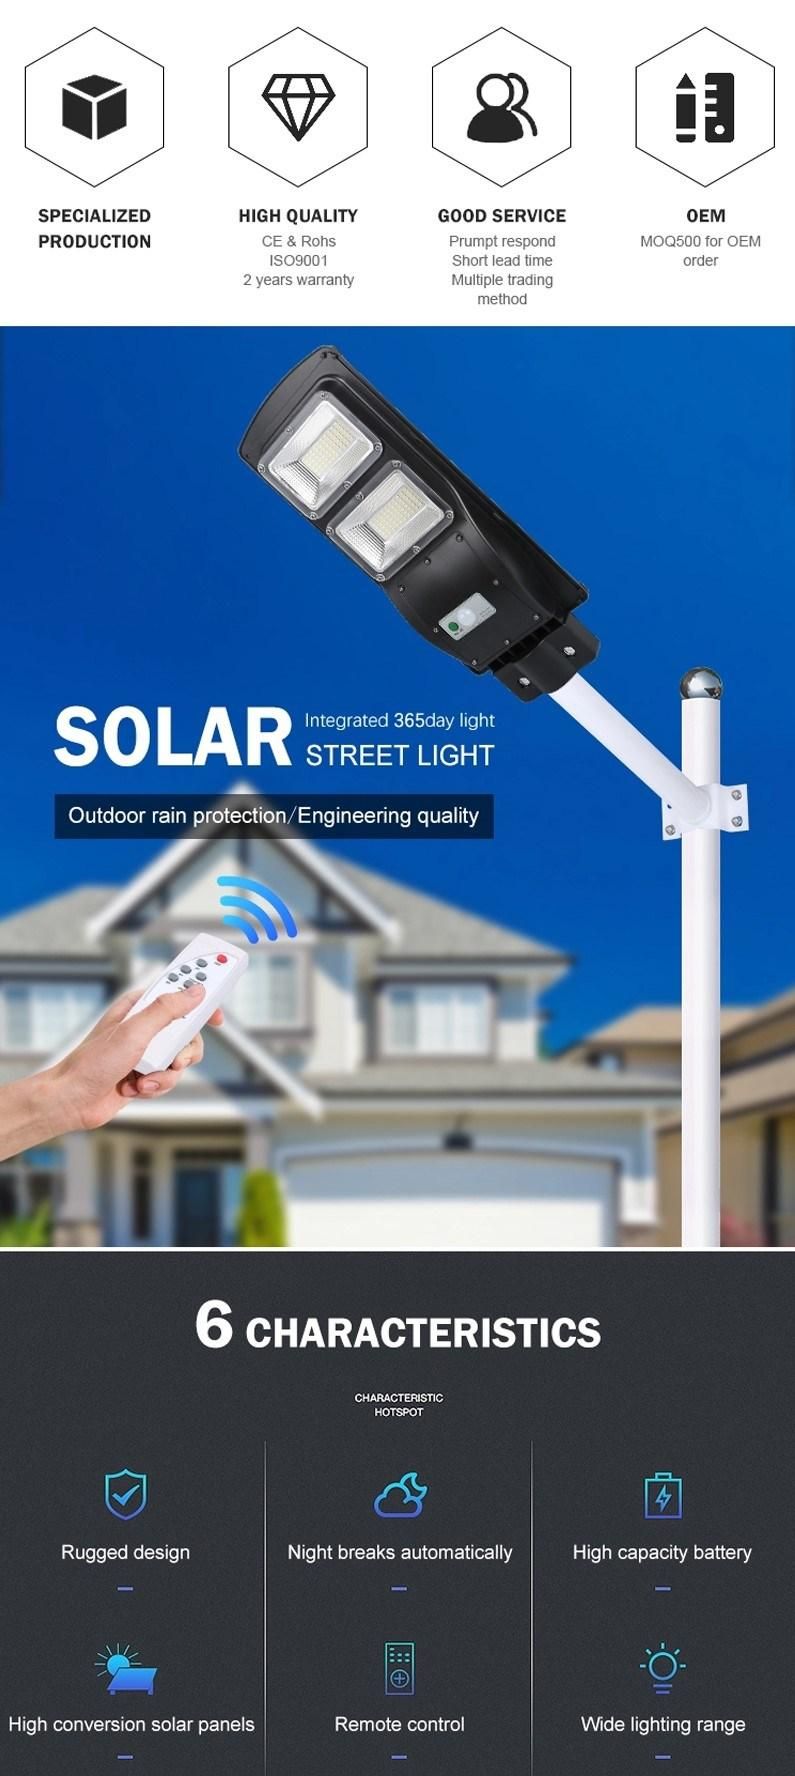 90W Sensor System Integrated All in One LED Solar Street Light, Outdoor IP65 Waterproof ABS Solar Square Lights, 30W 60W 120W Road Lighting